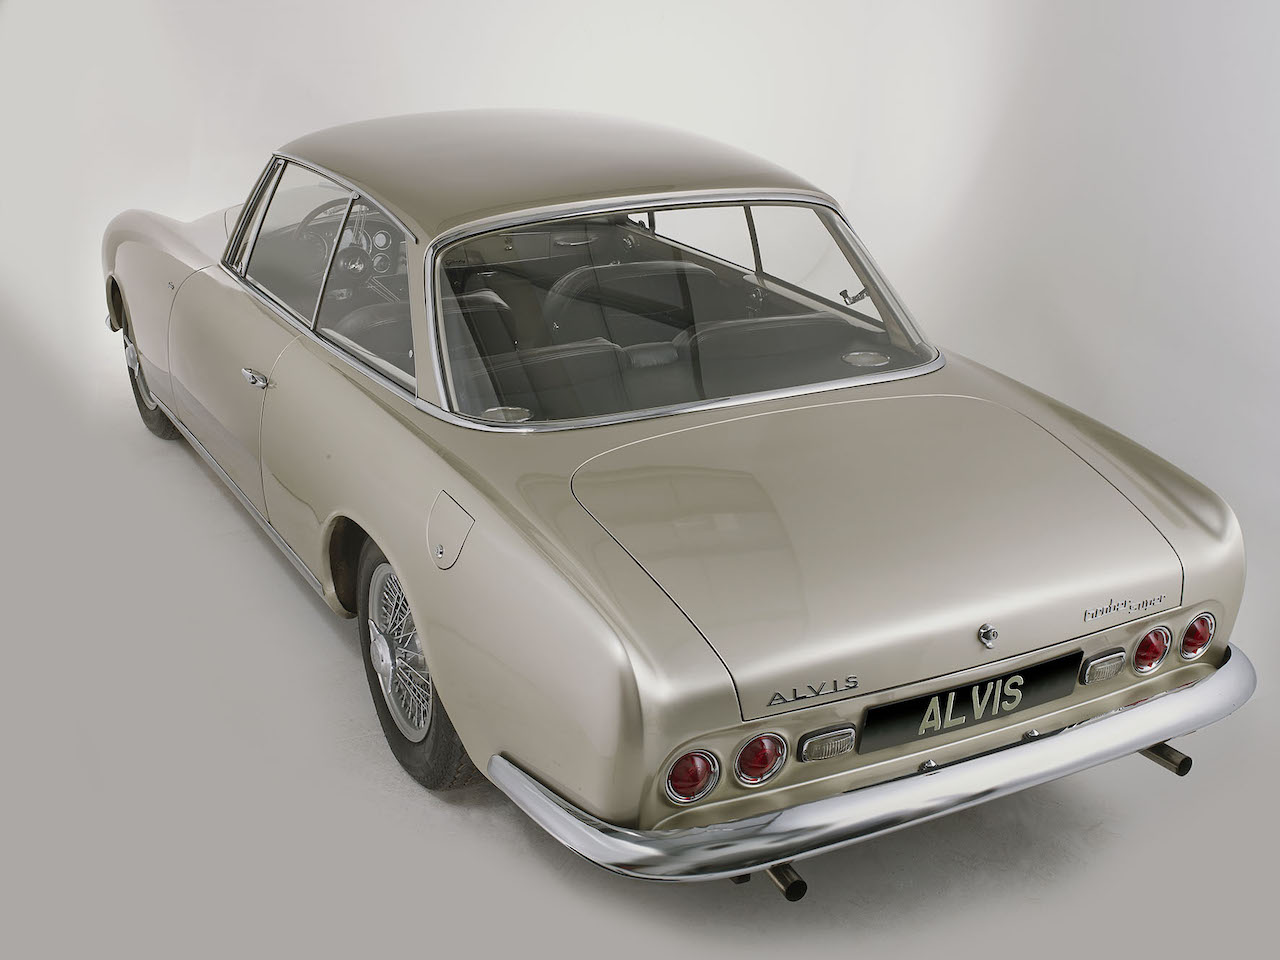 Alvis announces extended range of pre and post war Continuation Series cars